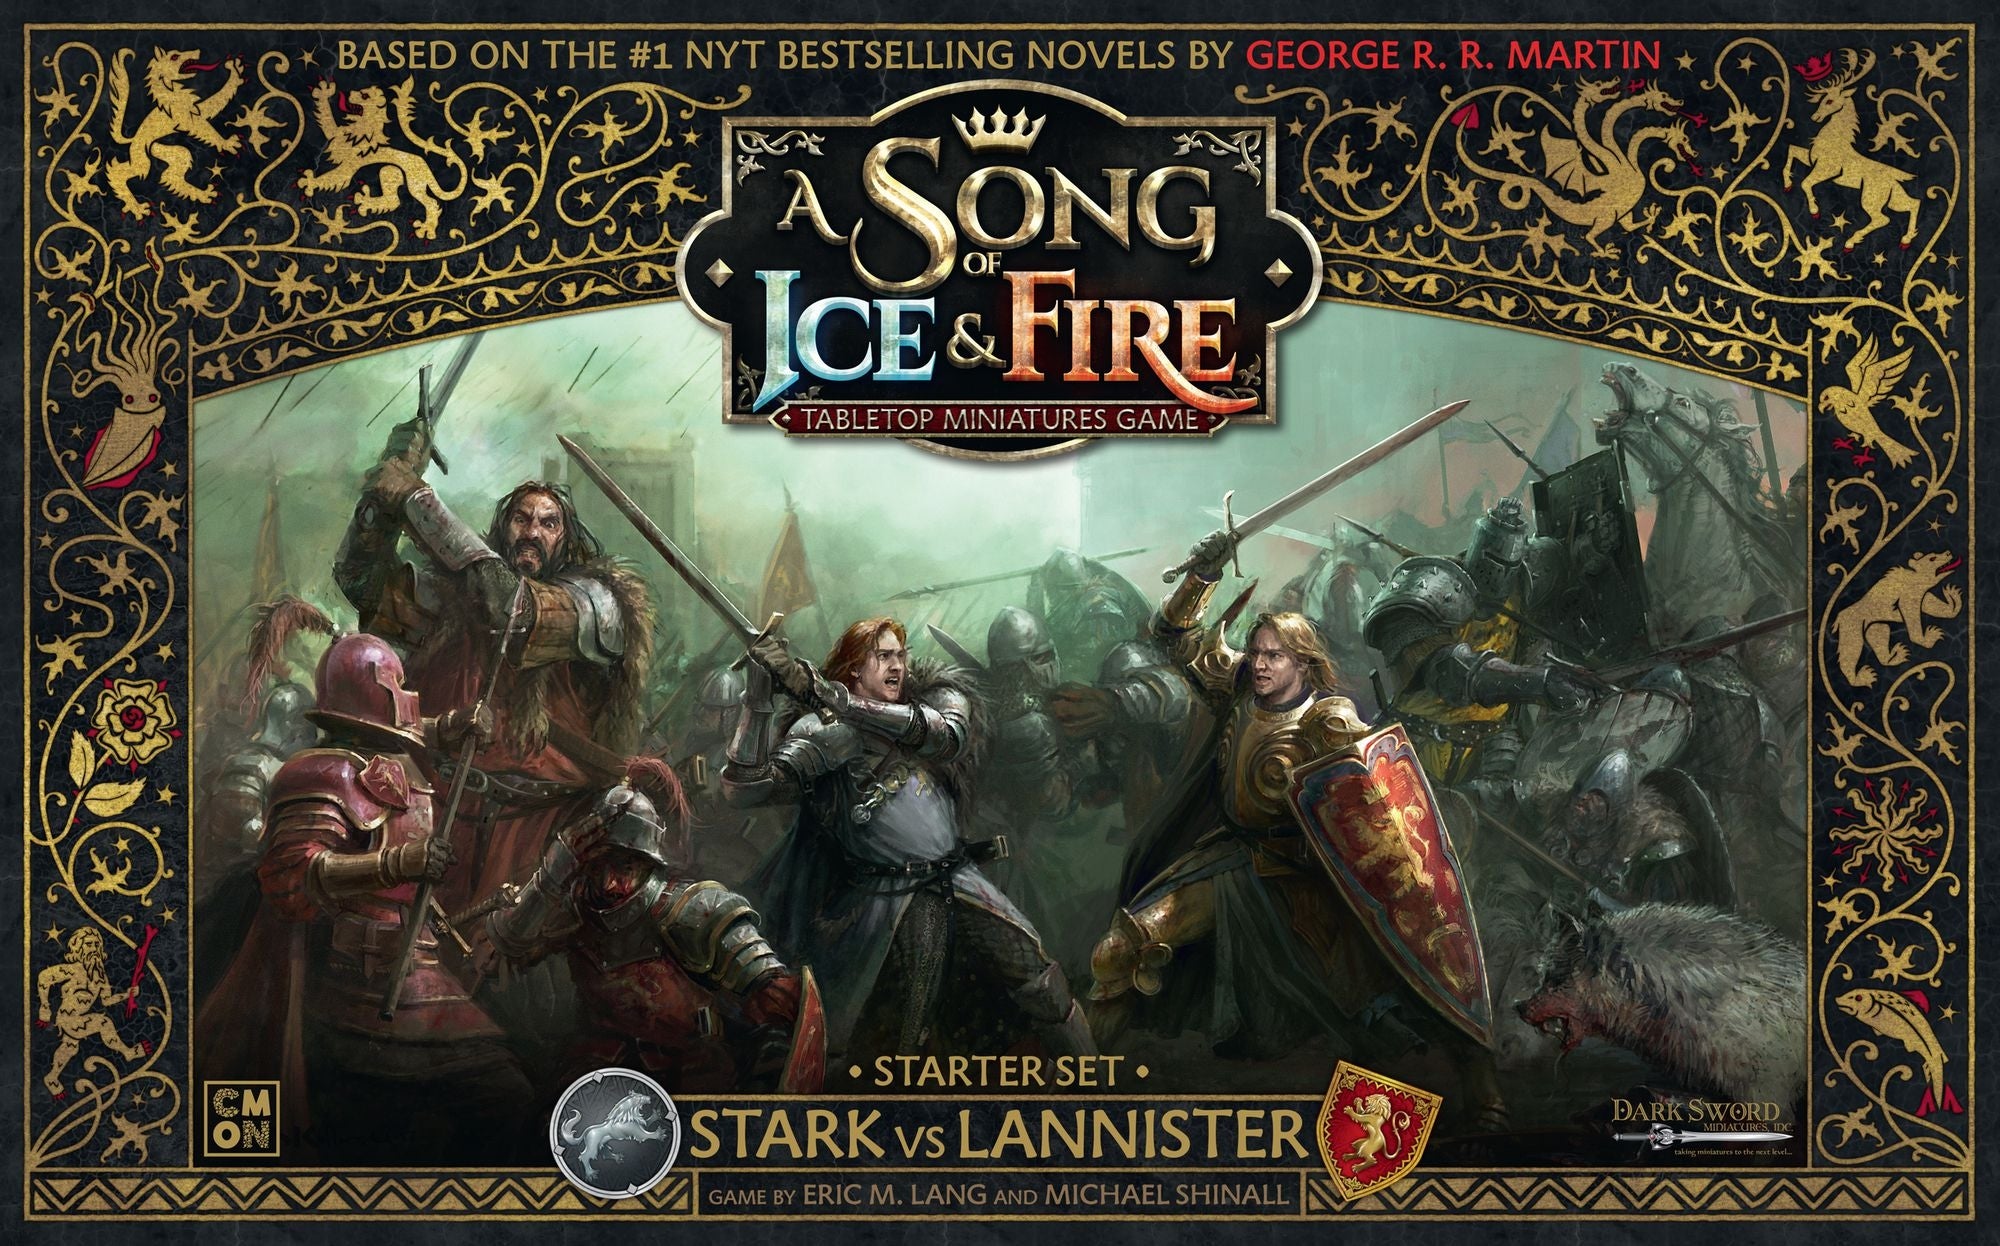 A Song of Ice and Fire Tabletop Miniature Game